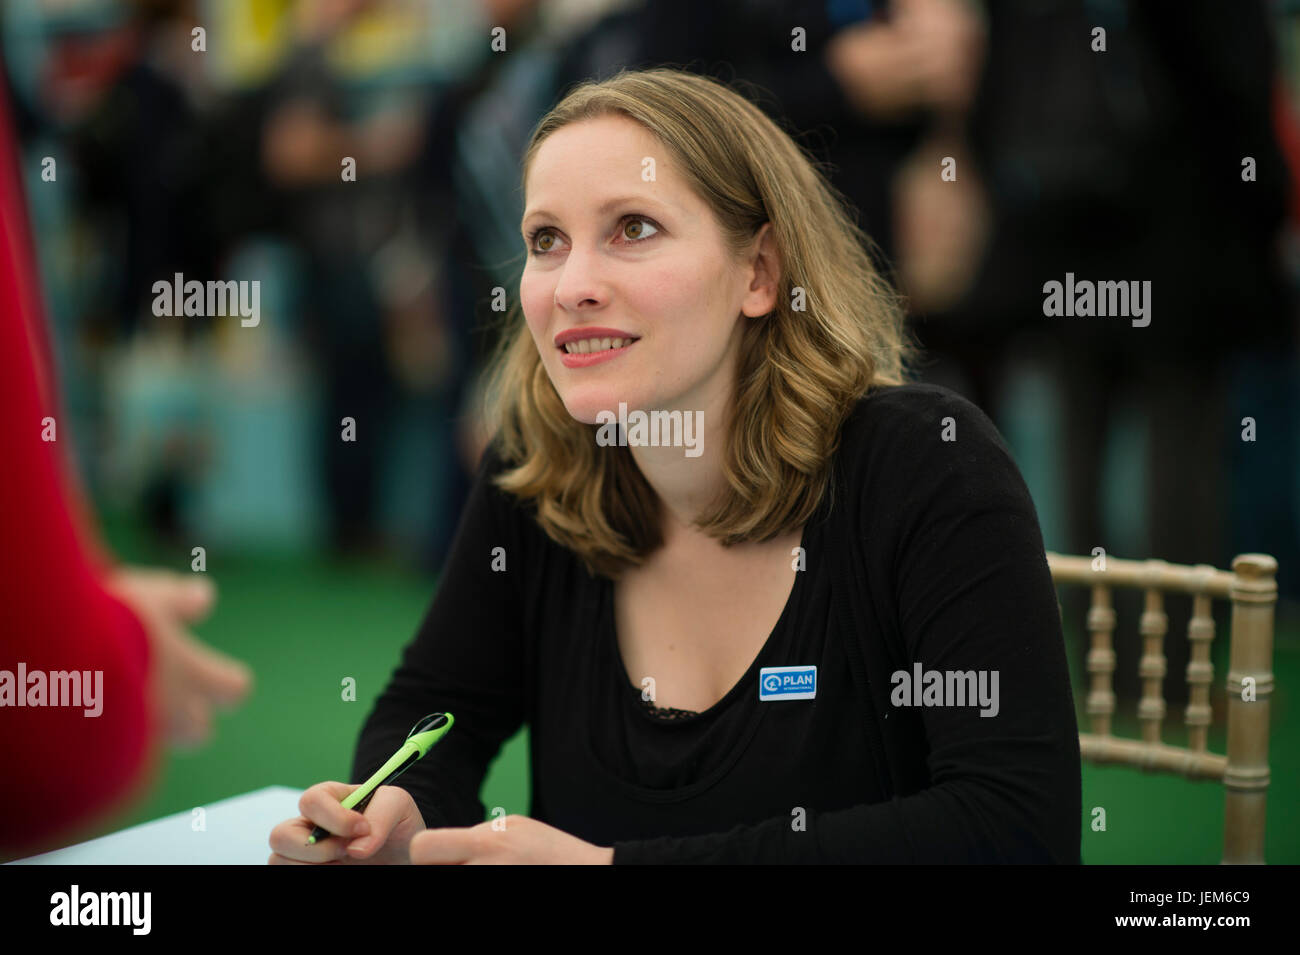 Laura Bates, British feminist writer. She founded the Everyday Sexism Project website in April 2012. Her first book, Everyday Sexism, was published in 2014.  Appearing   at the 2017 Hay Festival of Literature and the Arts, Hay on Wye, Wales UK Stock Photo